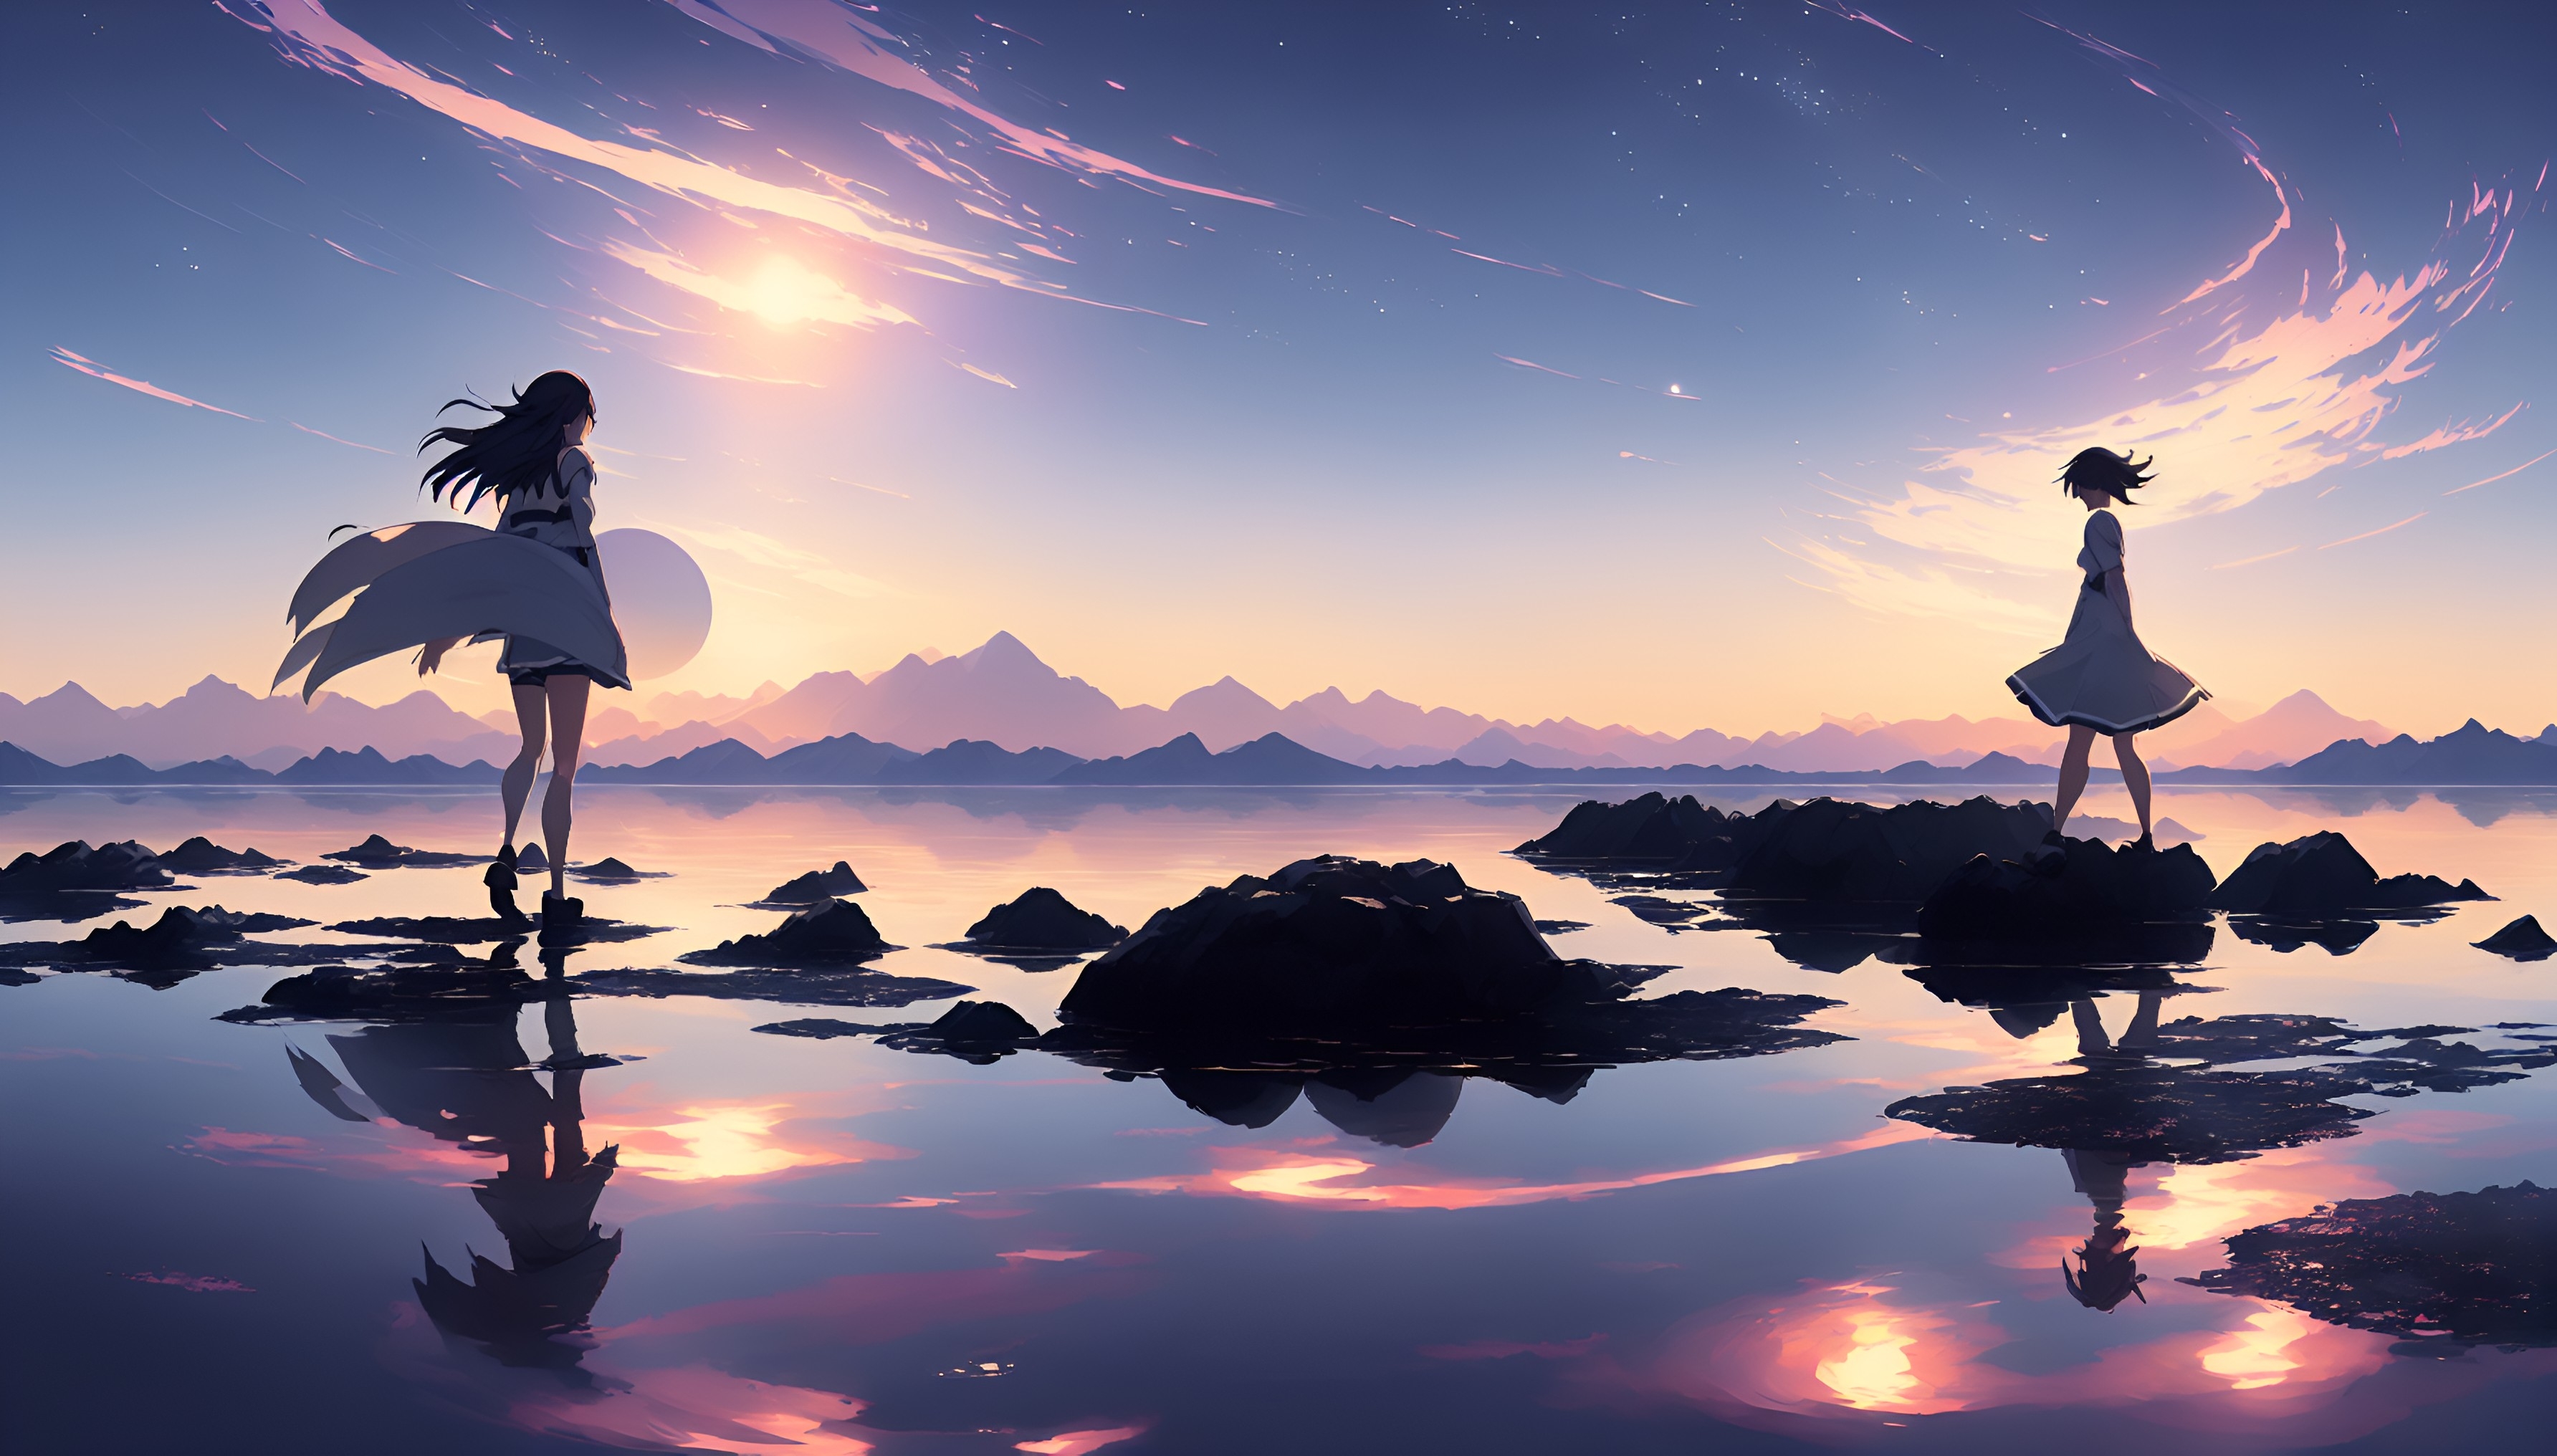 Anime Girl Ship Starry Sky Reflection On Water HD Anime Girl Wallpapers |  HD Wallpapers | ID #102448